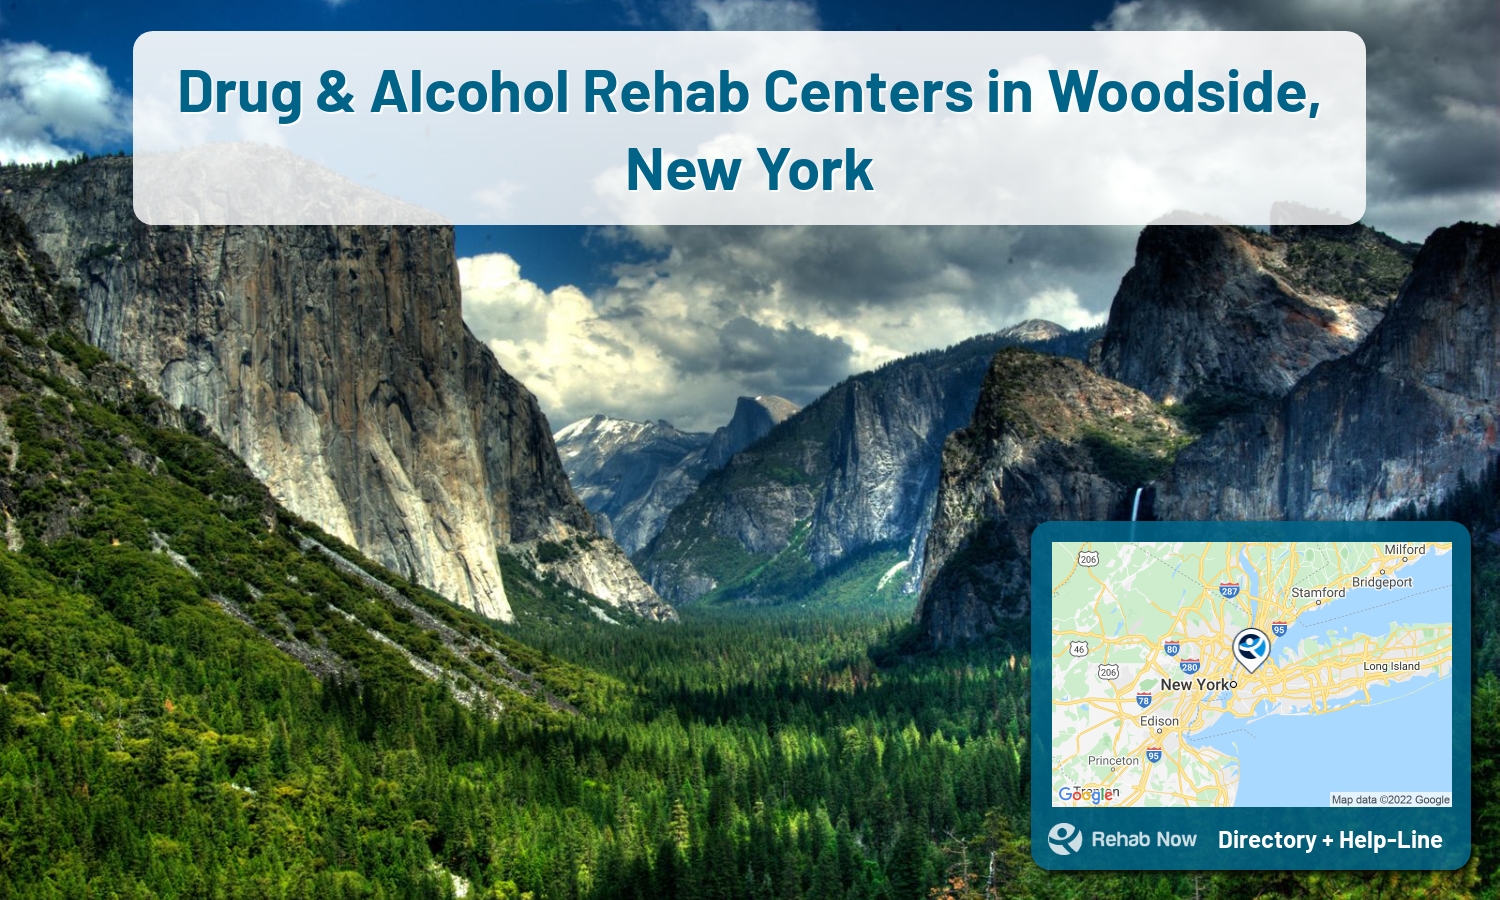 Drug rehab and alcohol treatment services nearby Woodside, NY. Need help choosing a treatment program? Call our free hotline!